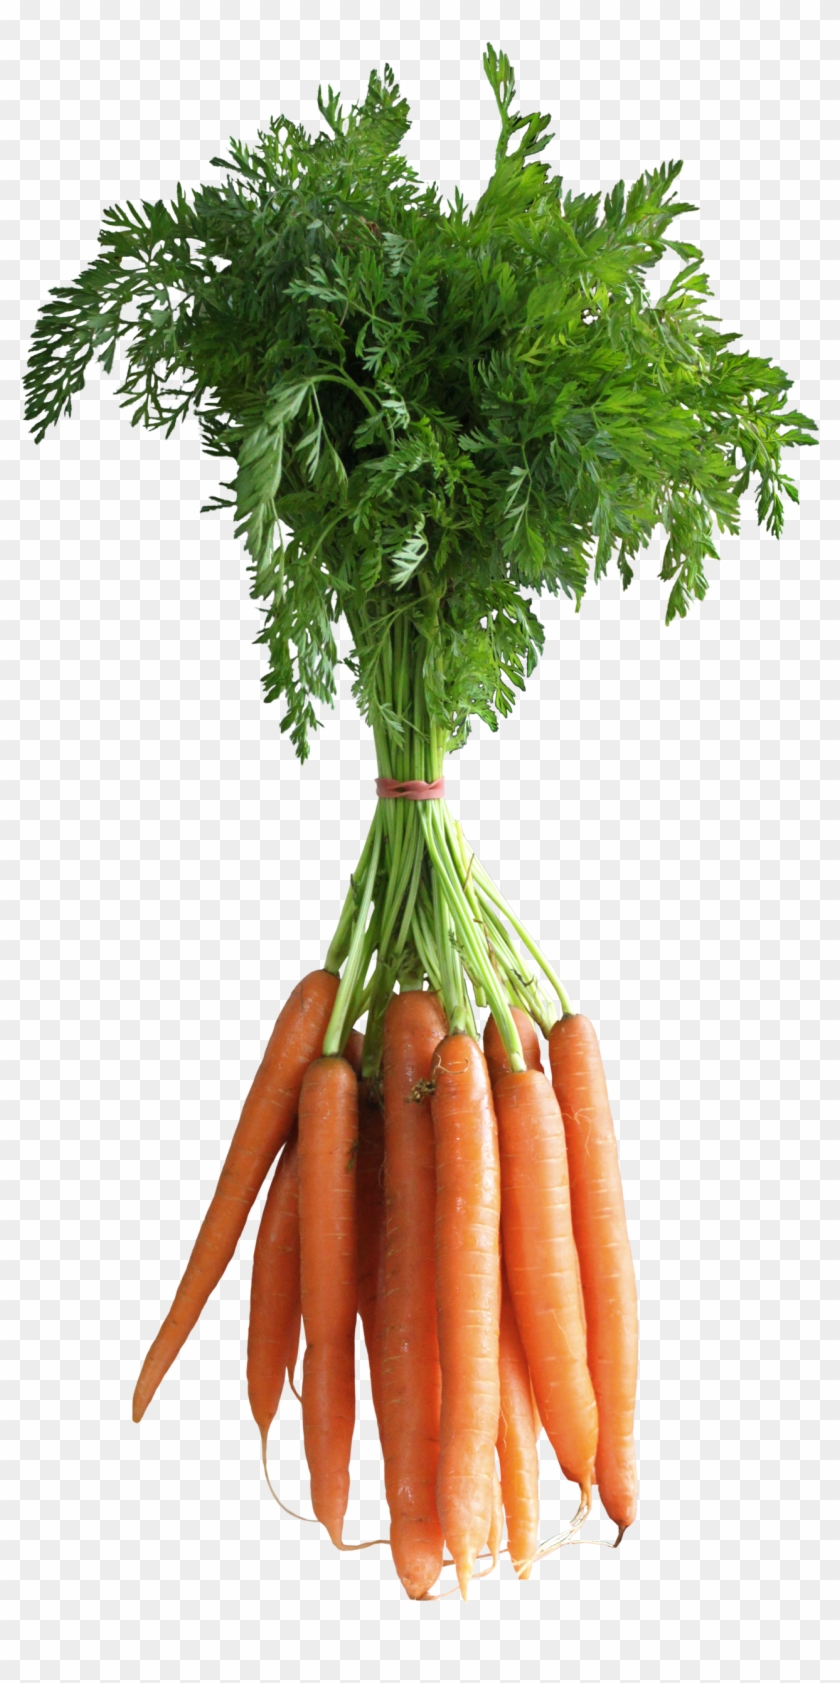 20 Incredible Carrot Vegetables Clipart - Carrots Png #1170159